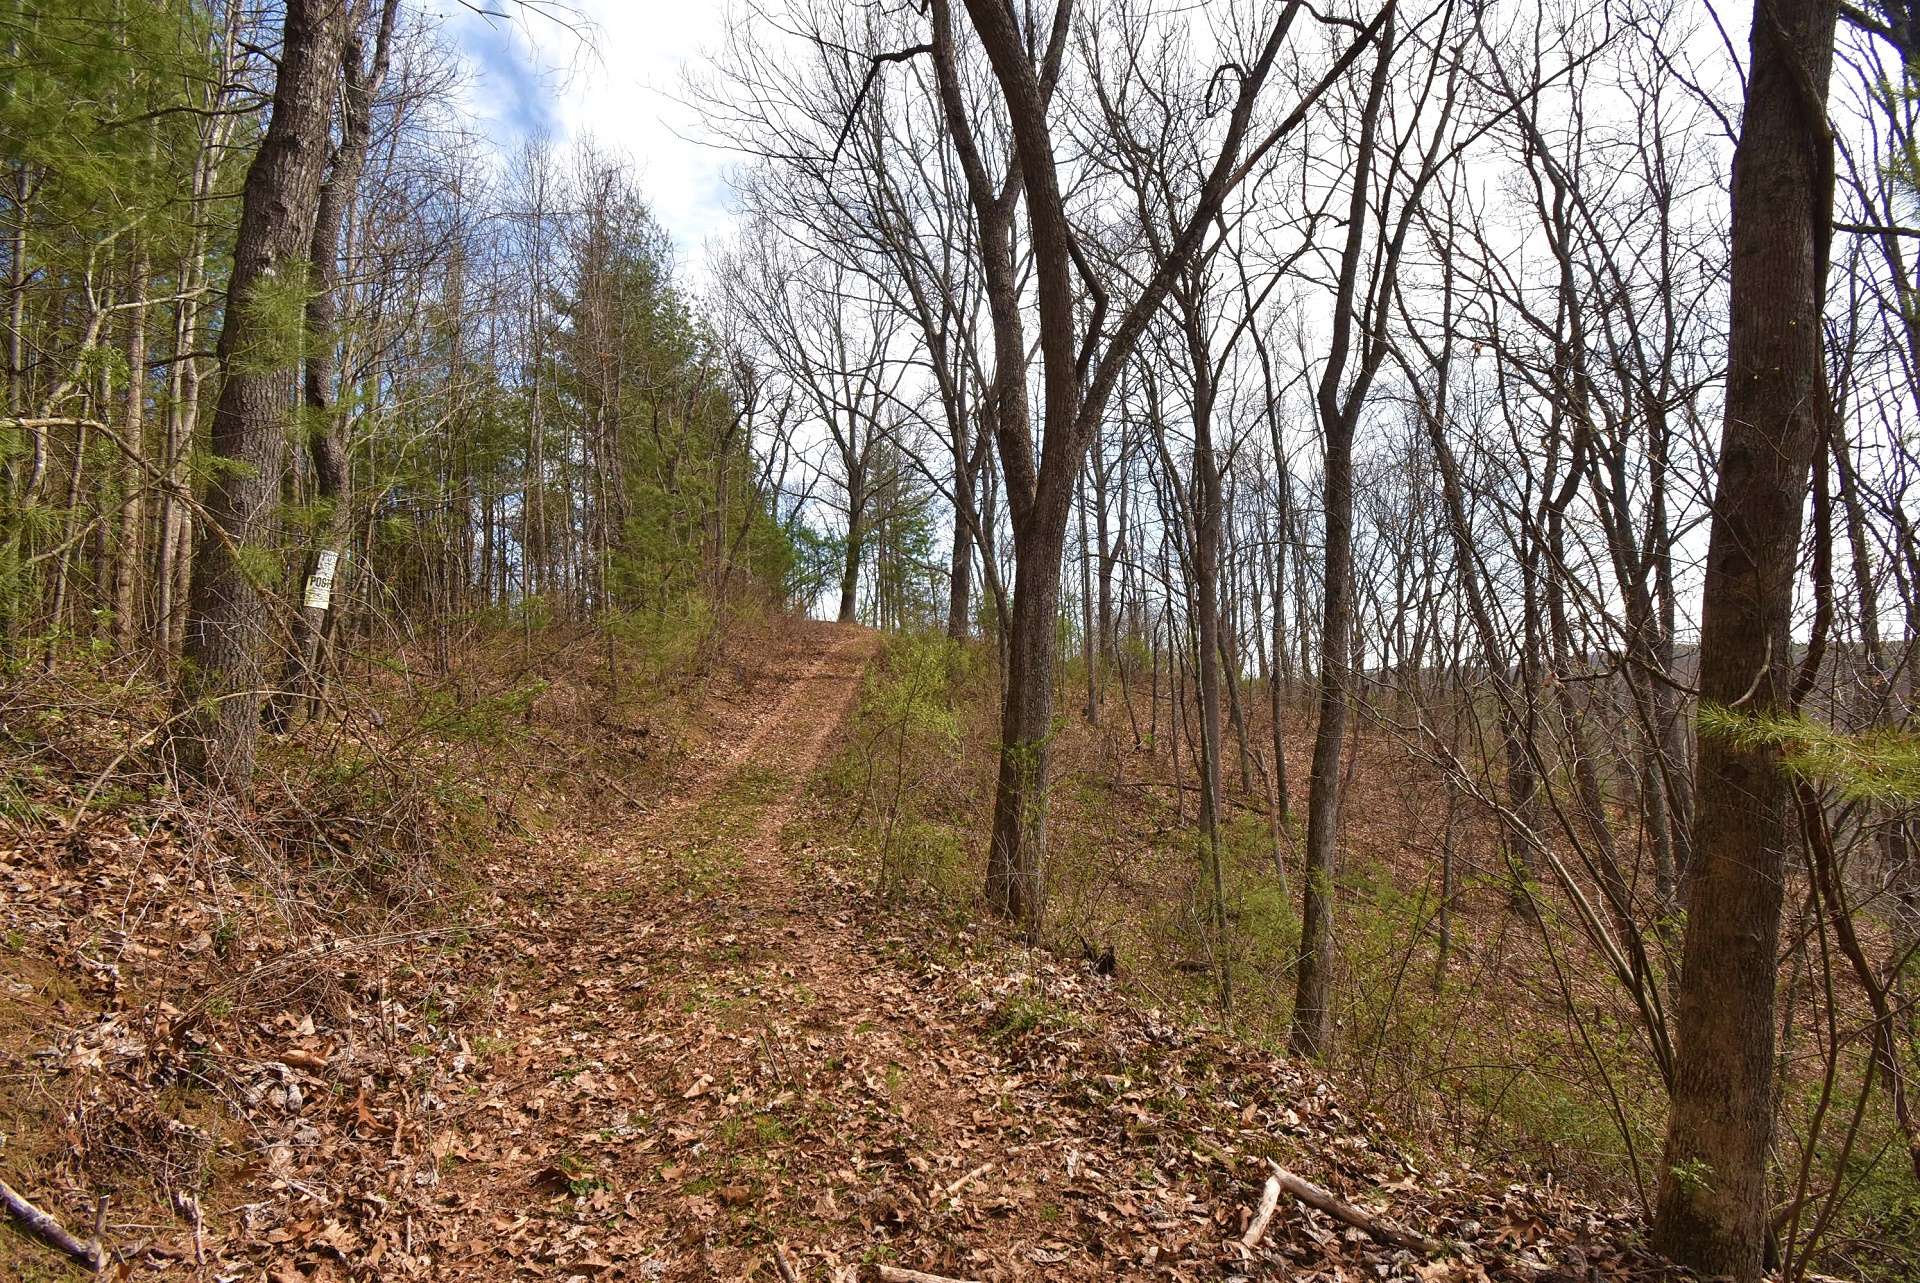 A private road leads up to the home site or camp site that already has a 3 bedroom septic permit issued and power close by.